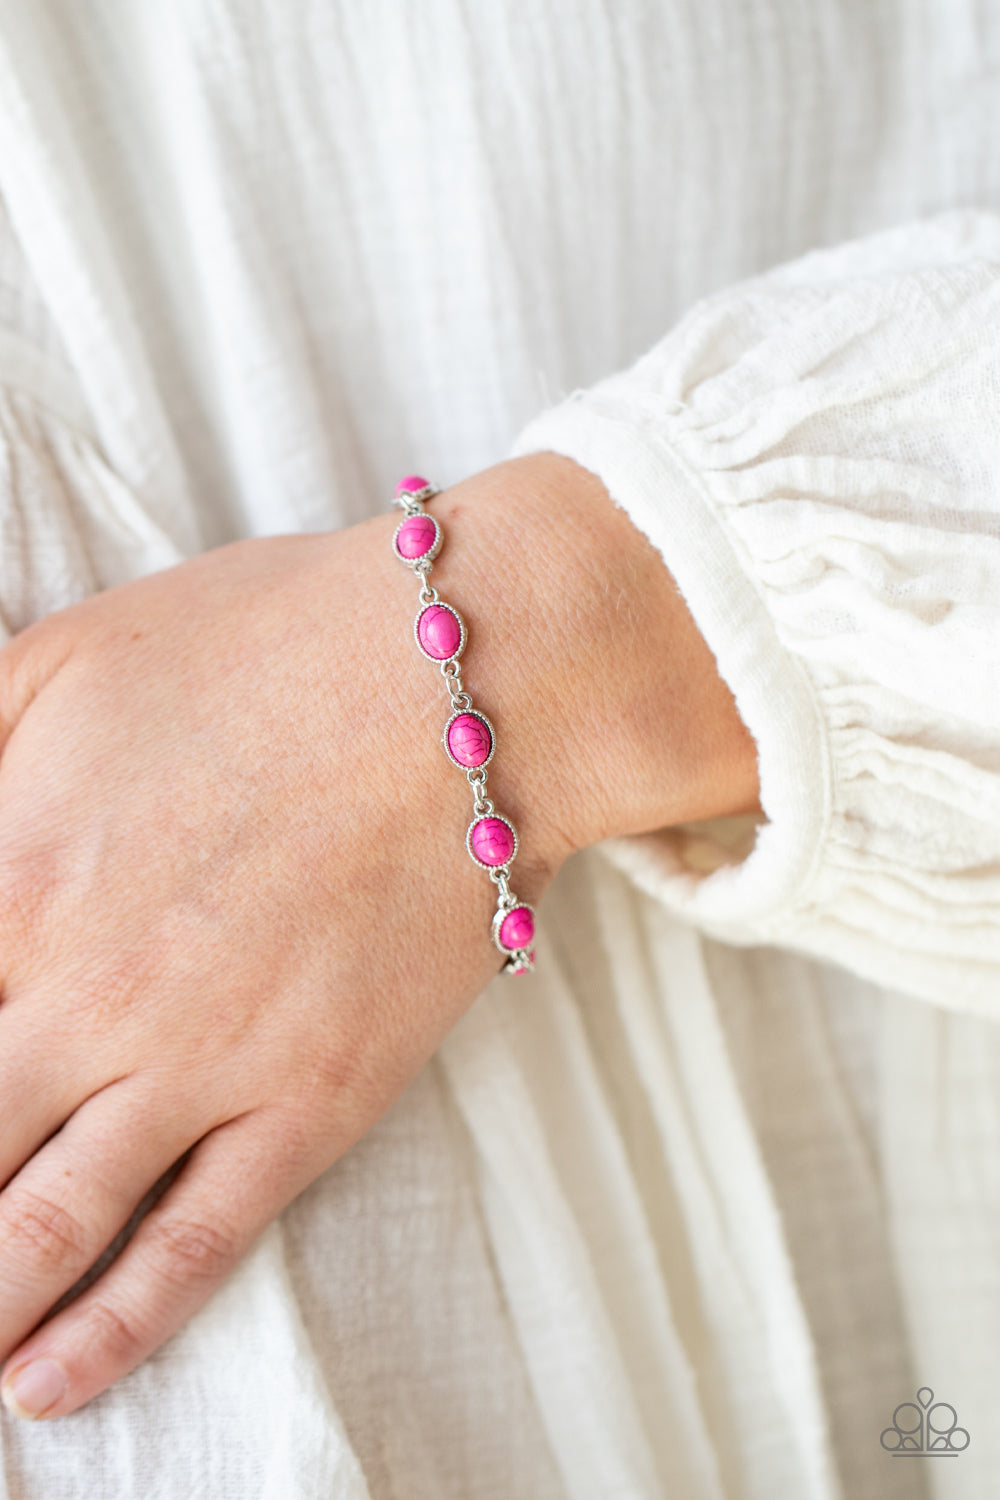 Desert Day Trip- Pink and Silver Bracelet- Paparazzi Accessories